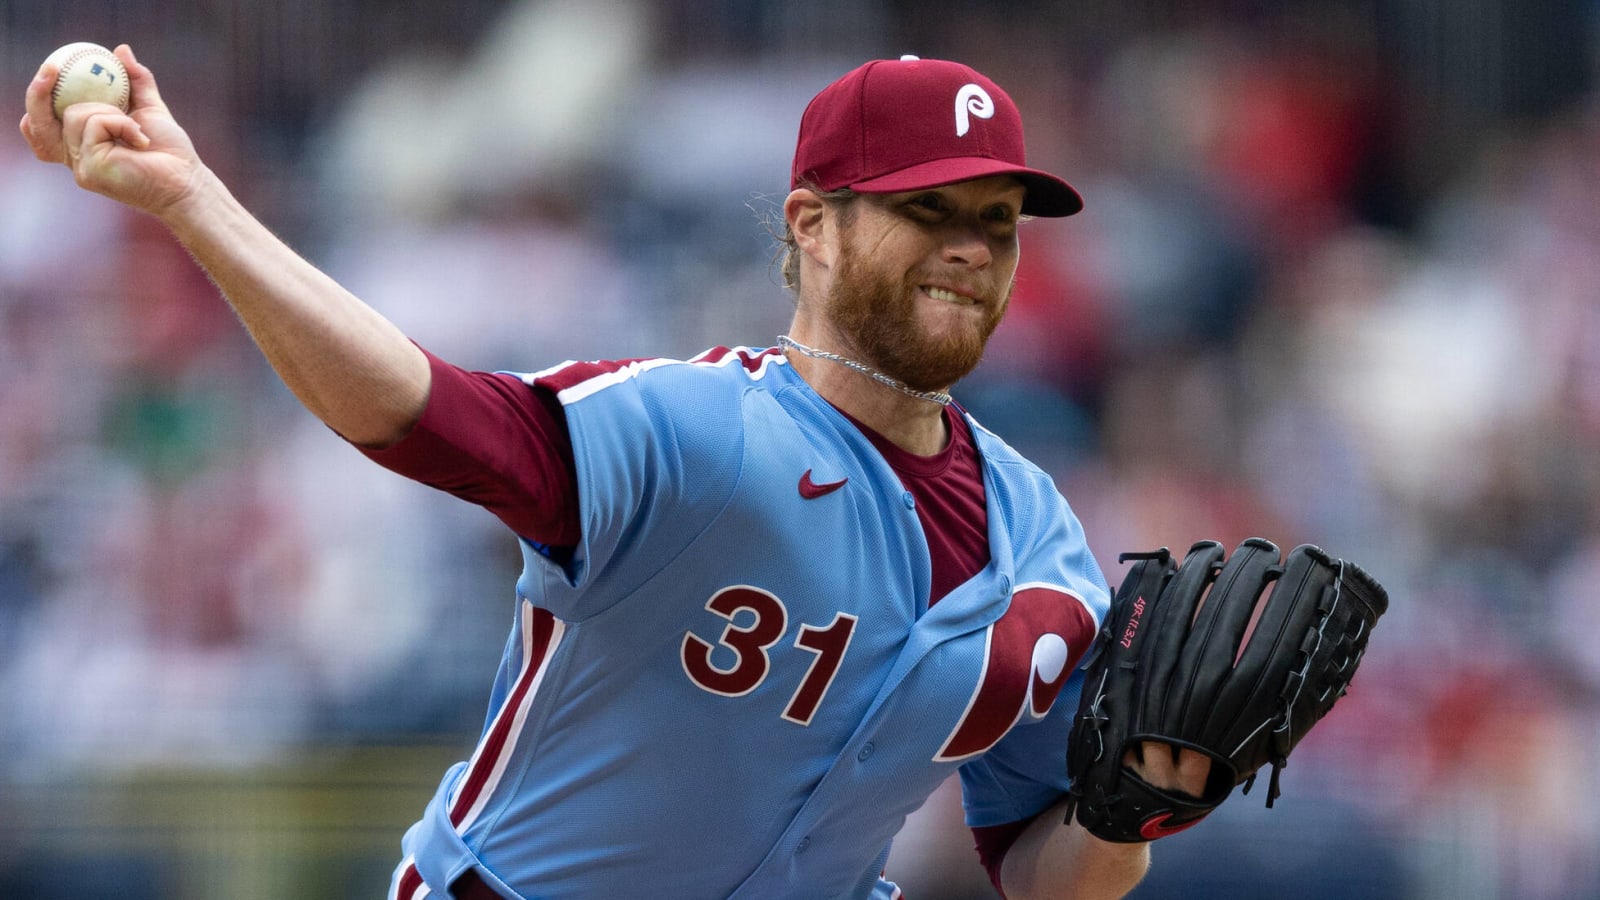 Craig Kimbrel 8th pitcher in MLB history to earn 400 saves